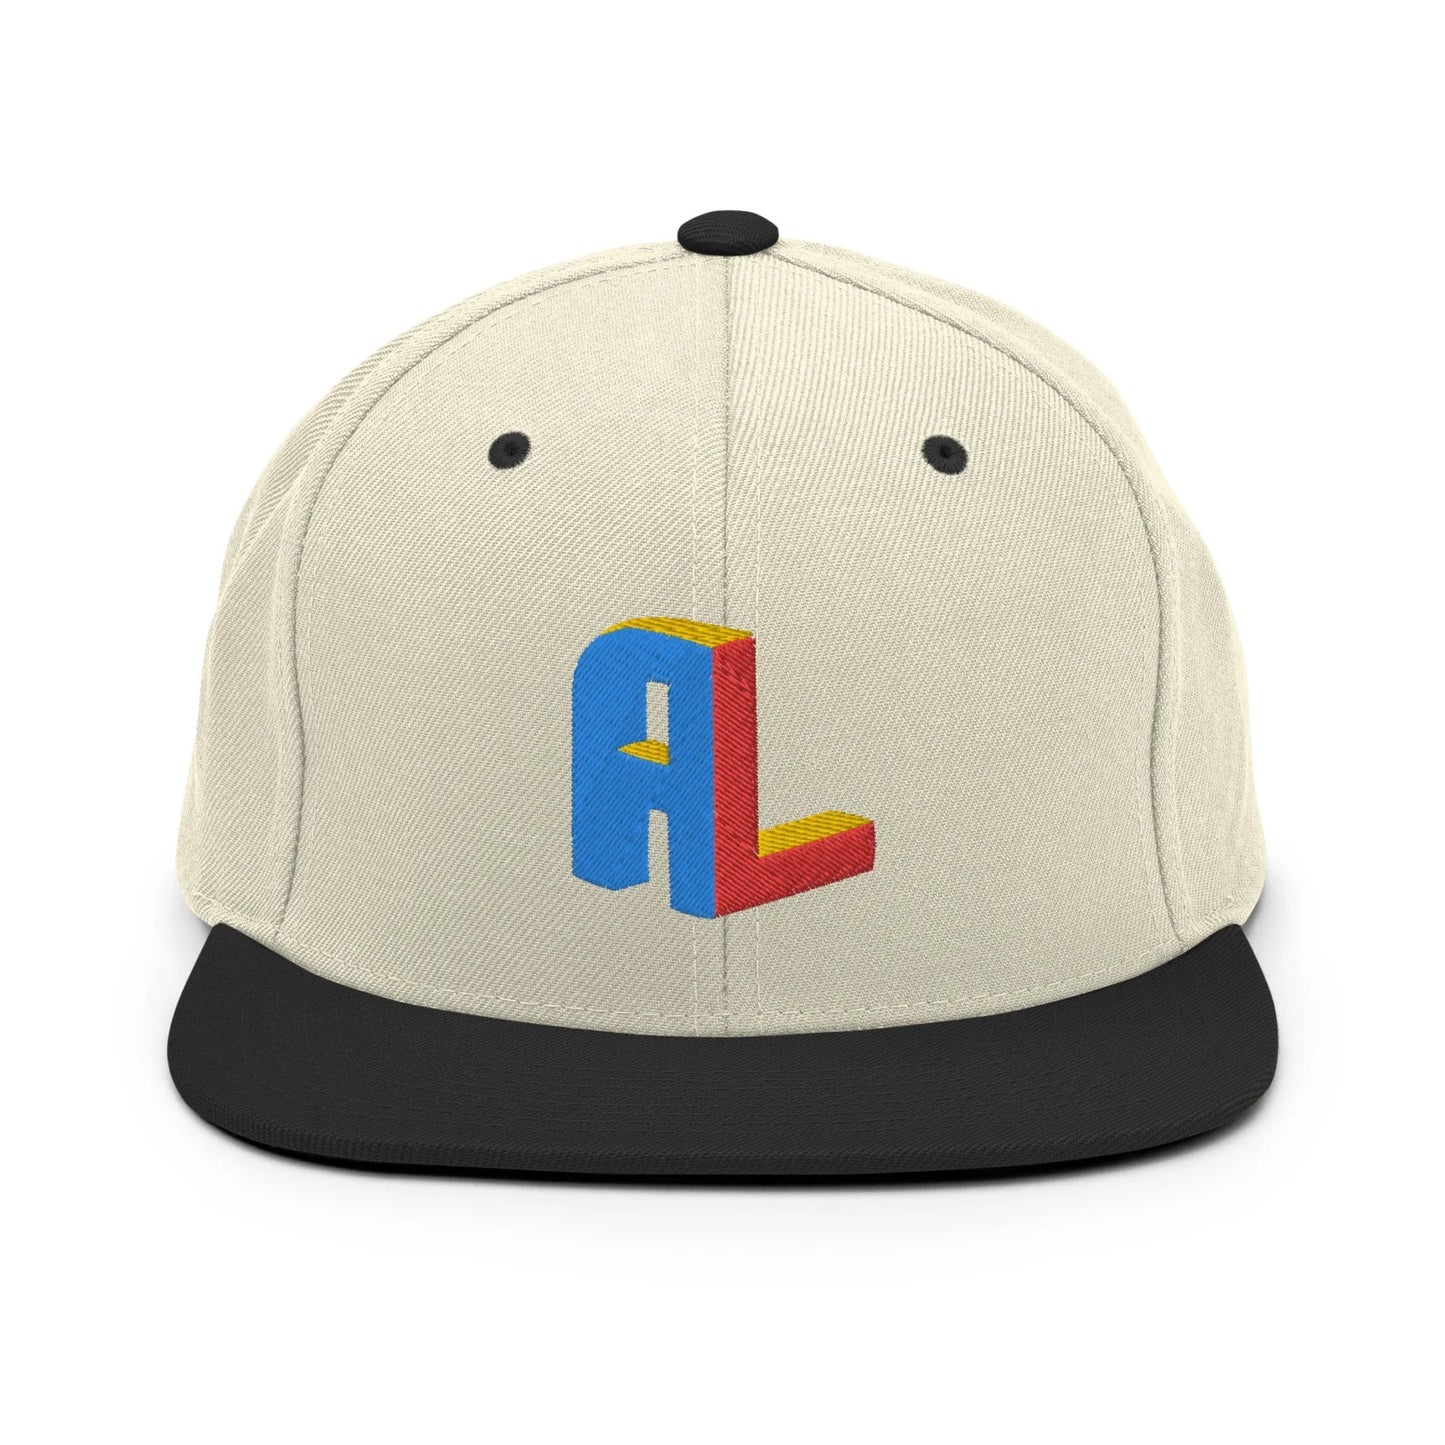 Ance Larmstrong ShowZone snapback hat in natural white with black brim and accents